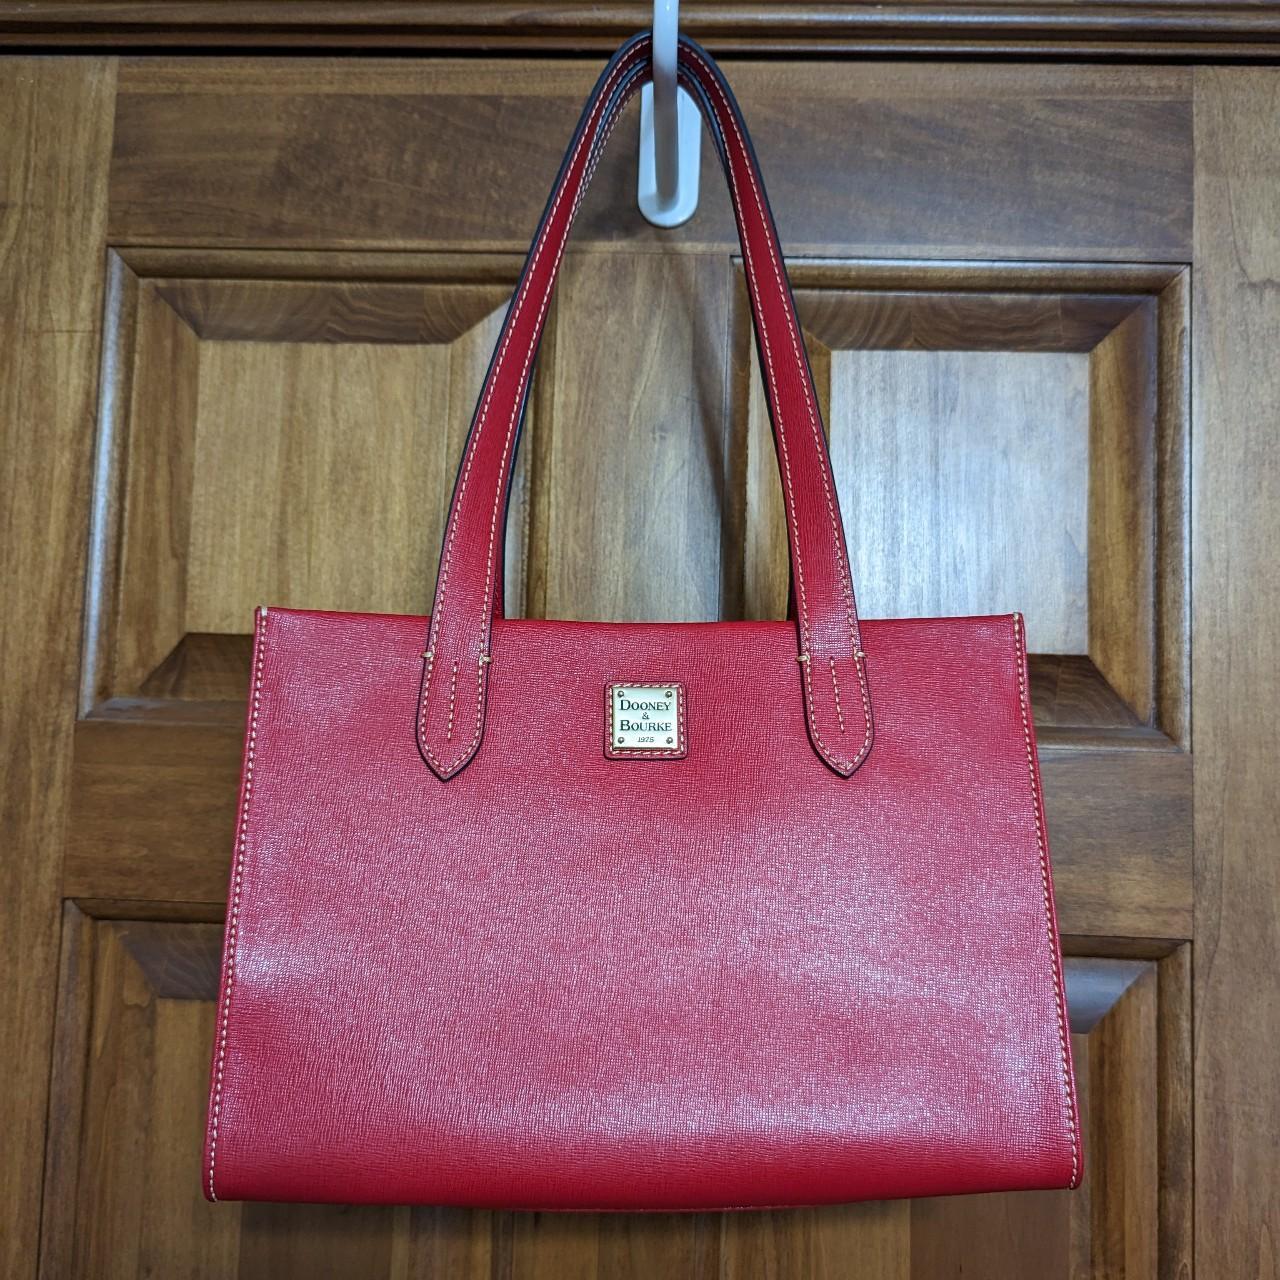 Dooney & Bourke, Bags, Like New Dooney Bourke Saffiano Leather Tote  Excellent Condition